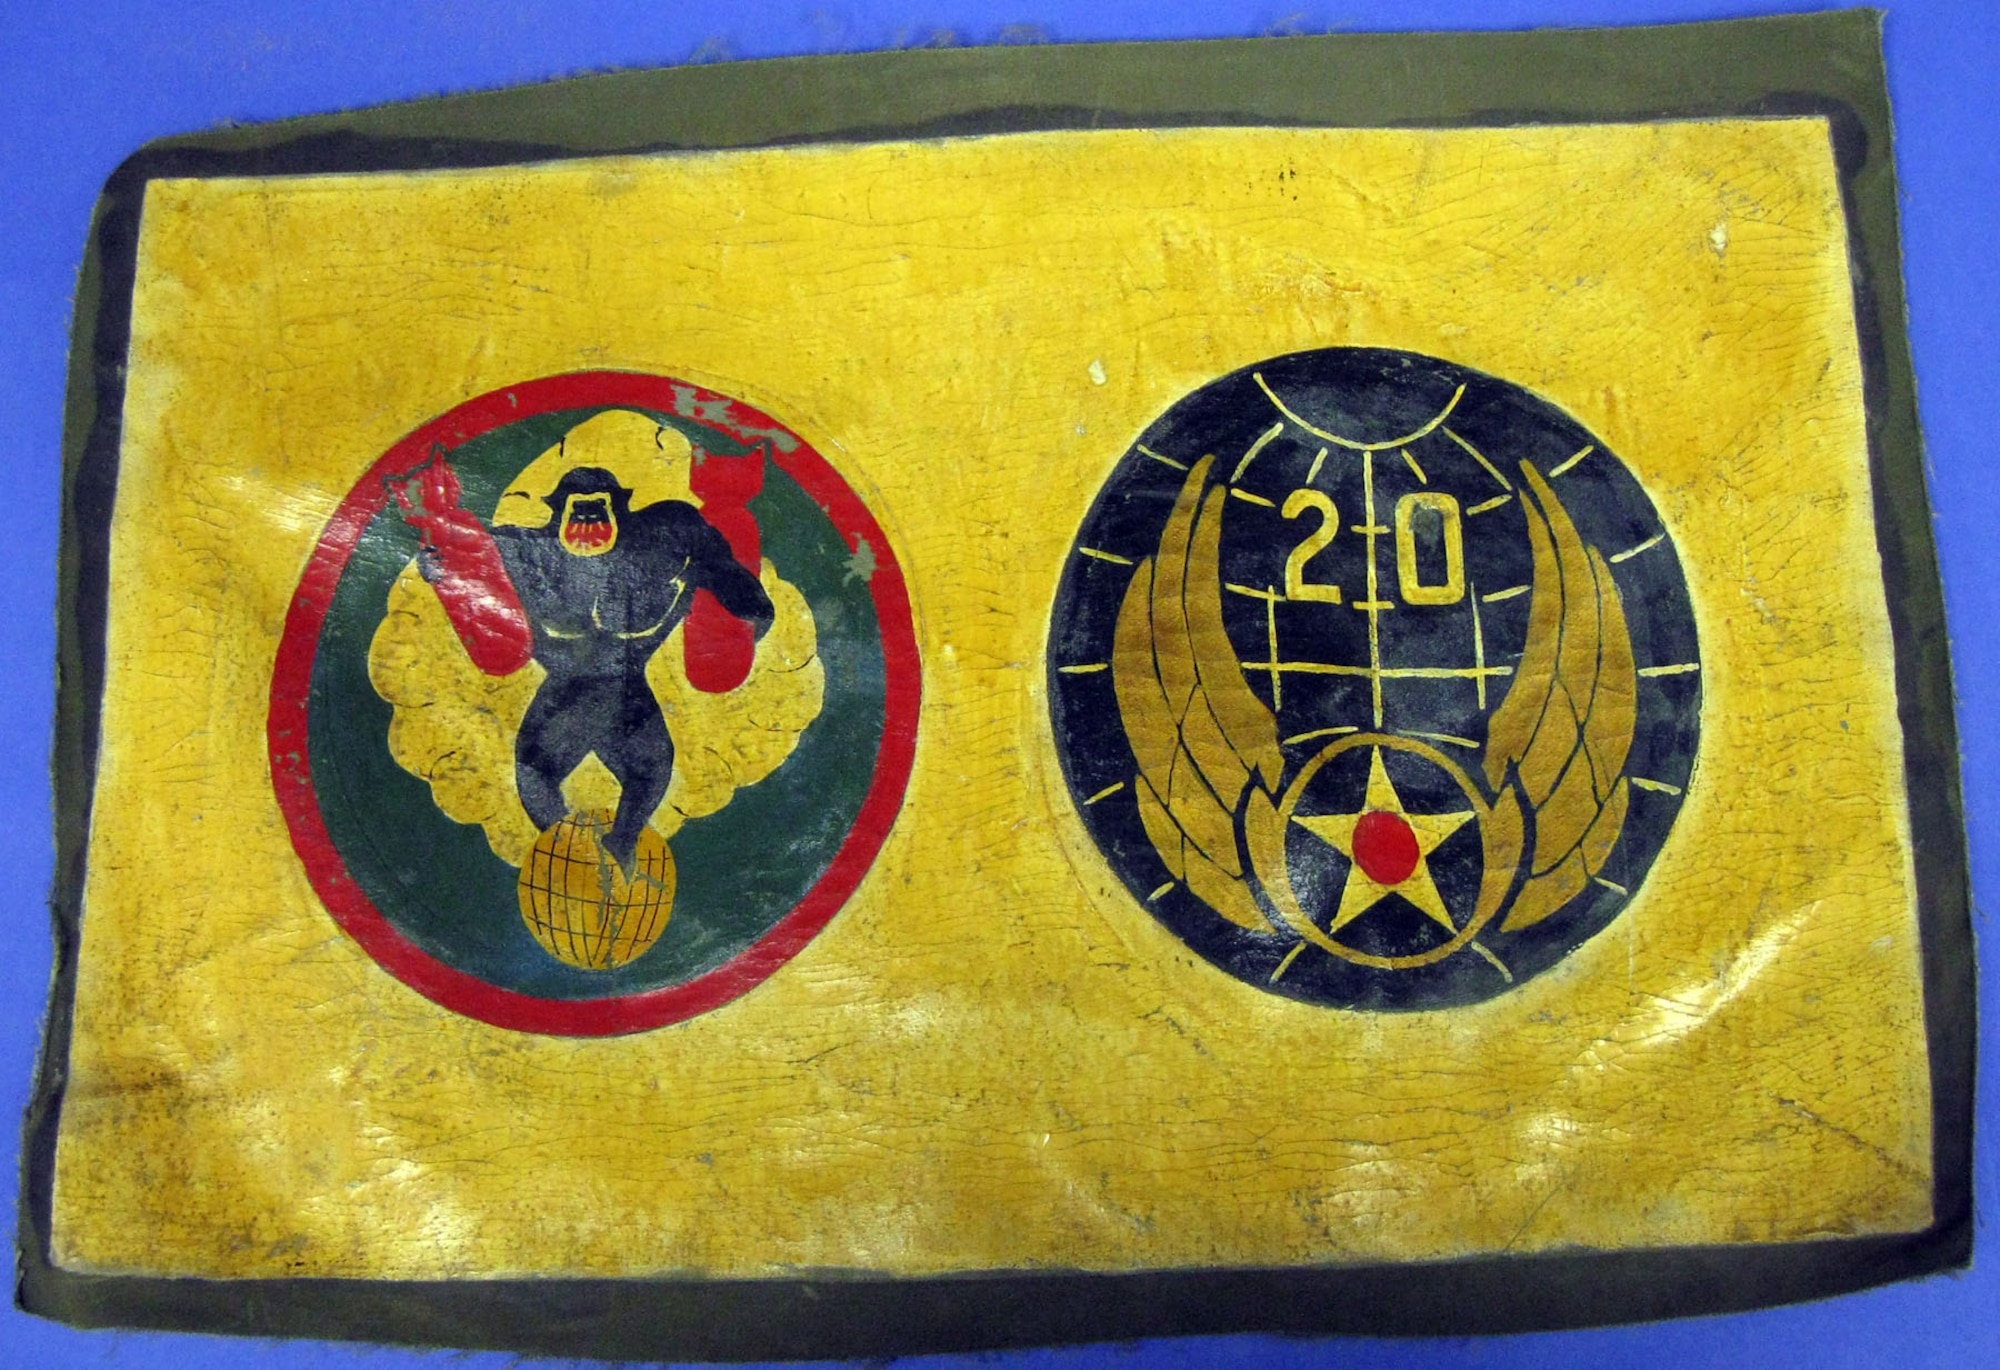 The painted fabric insignia represents the 870th Bombardment Squadron, which was part of the 20th Air Force, XX Bomber Command, 73rd Bomb Wing, 497th Bomb Group. The unit flew B-17s and later B-29s and saw combat in the Western Pacific from Nov. 1, 1944, through Aug. 14, 1945. The unit was disbanded on March 31, 1946. The item belonged to 1st Lt. Robert Harris. (U.S. Air Force photo)